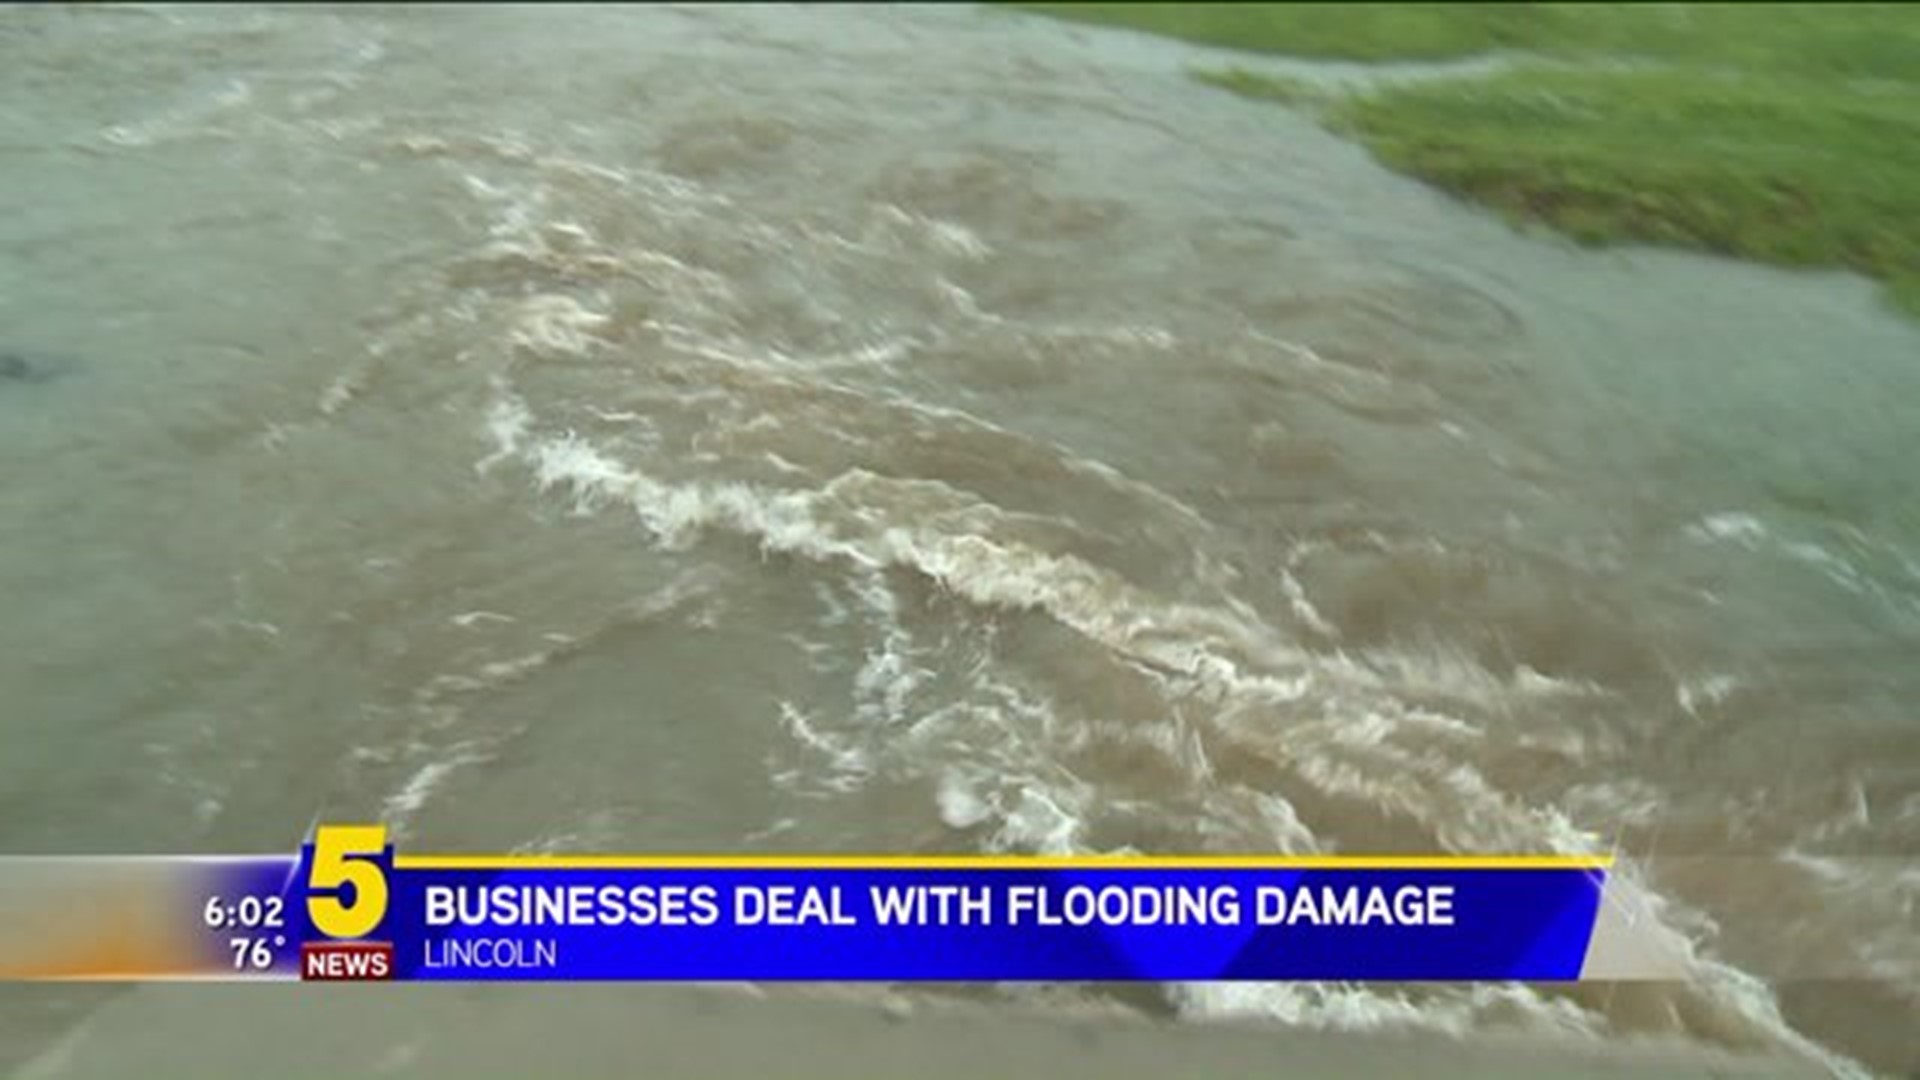 Businesses Deal With Flooding